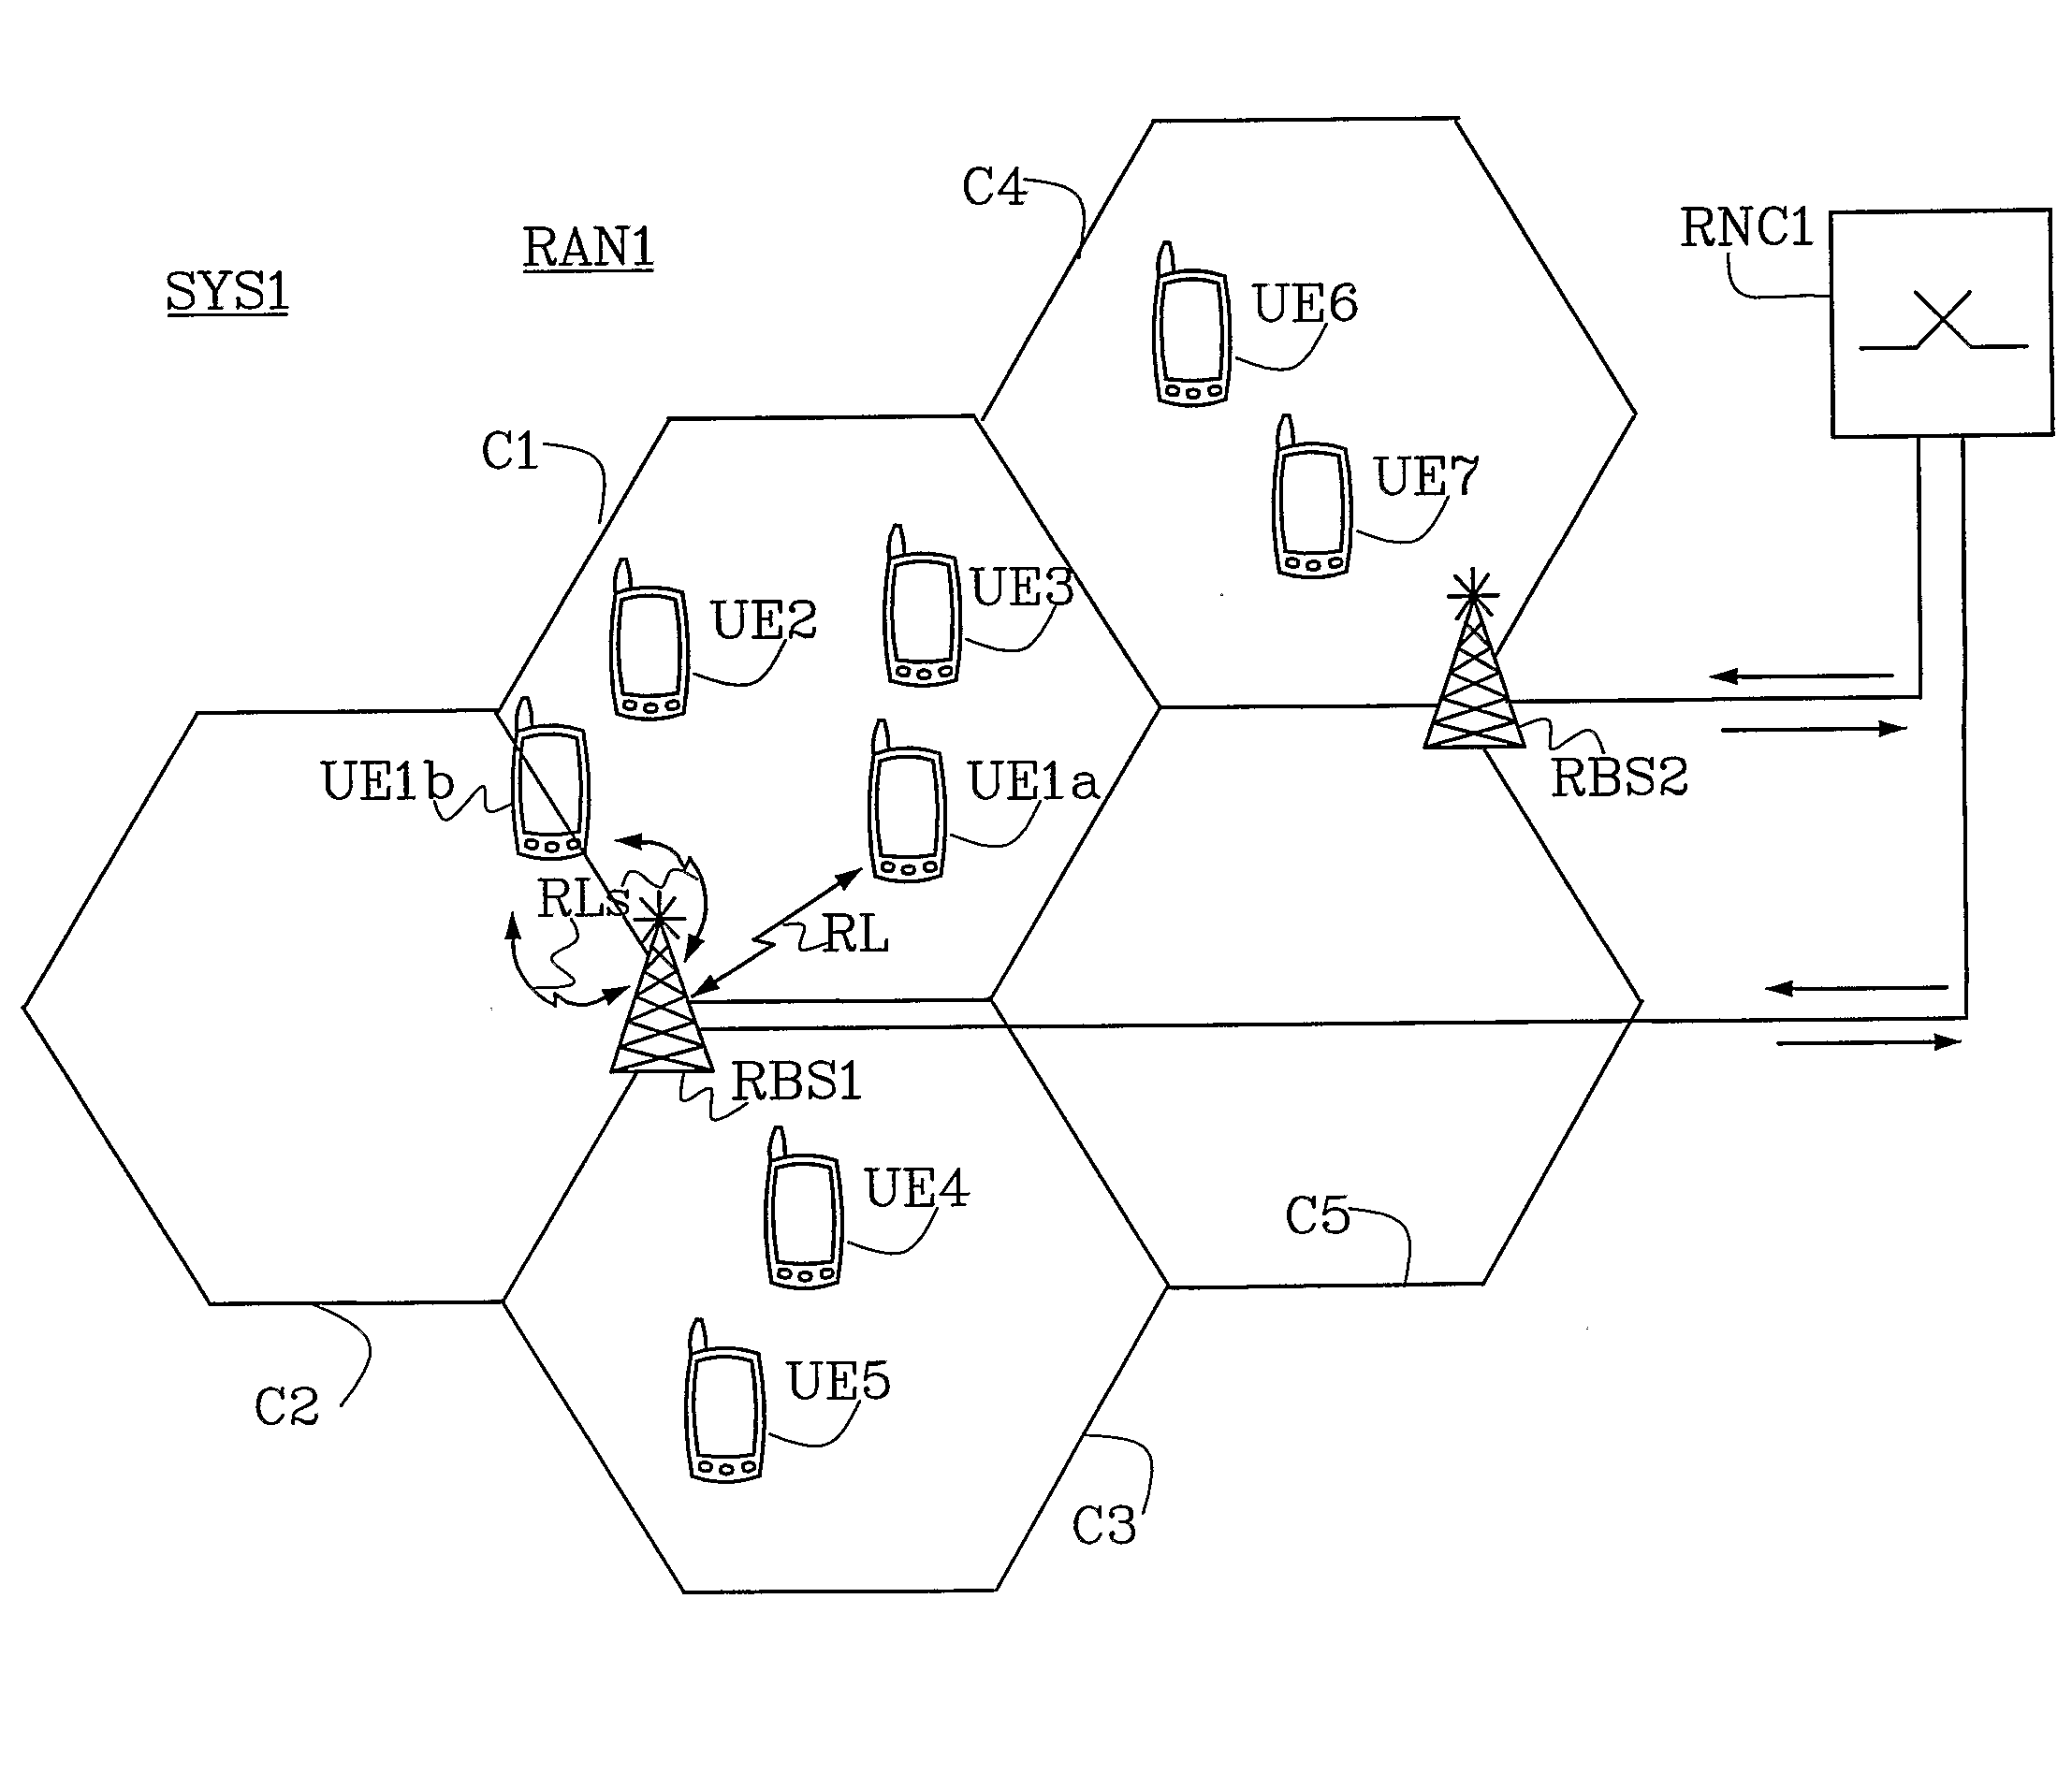 Method and Apparatus in a Telecommunication System